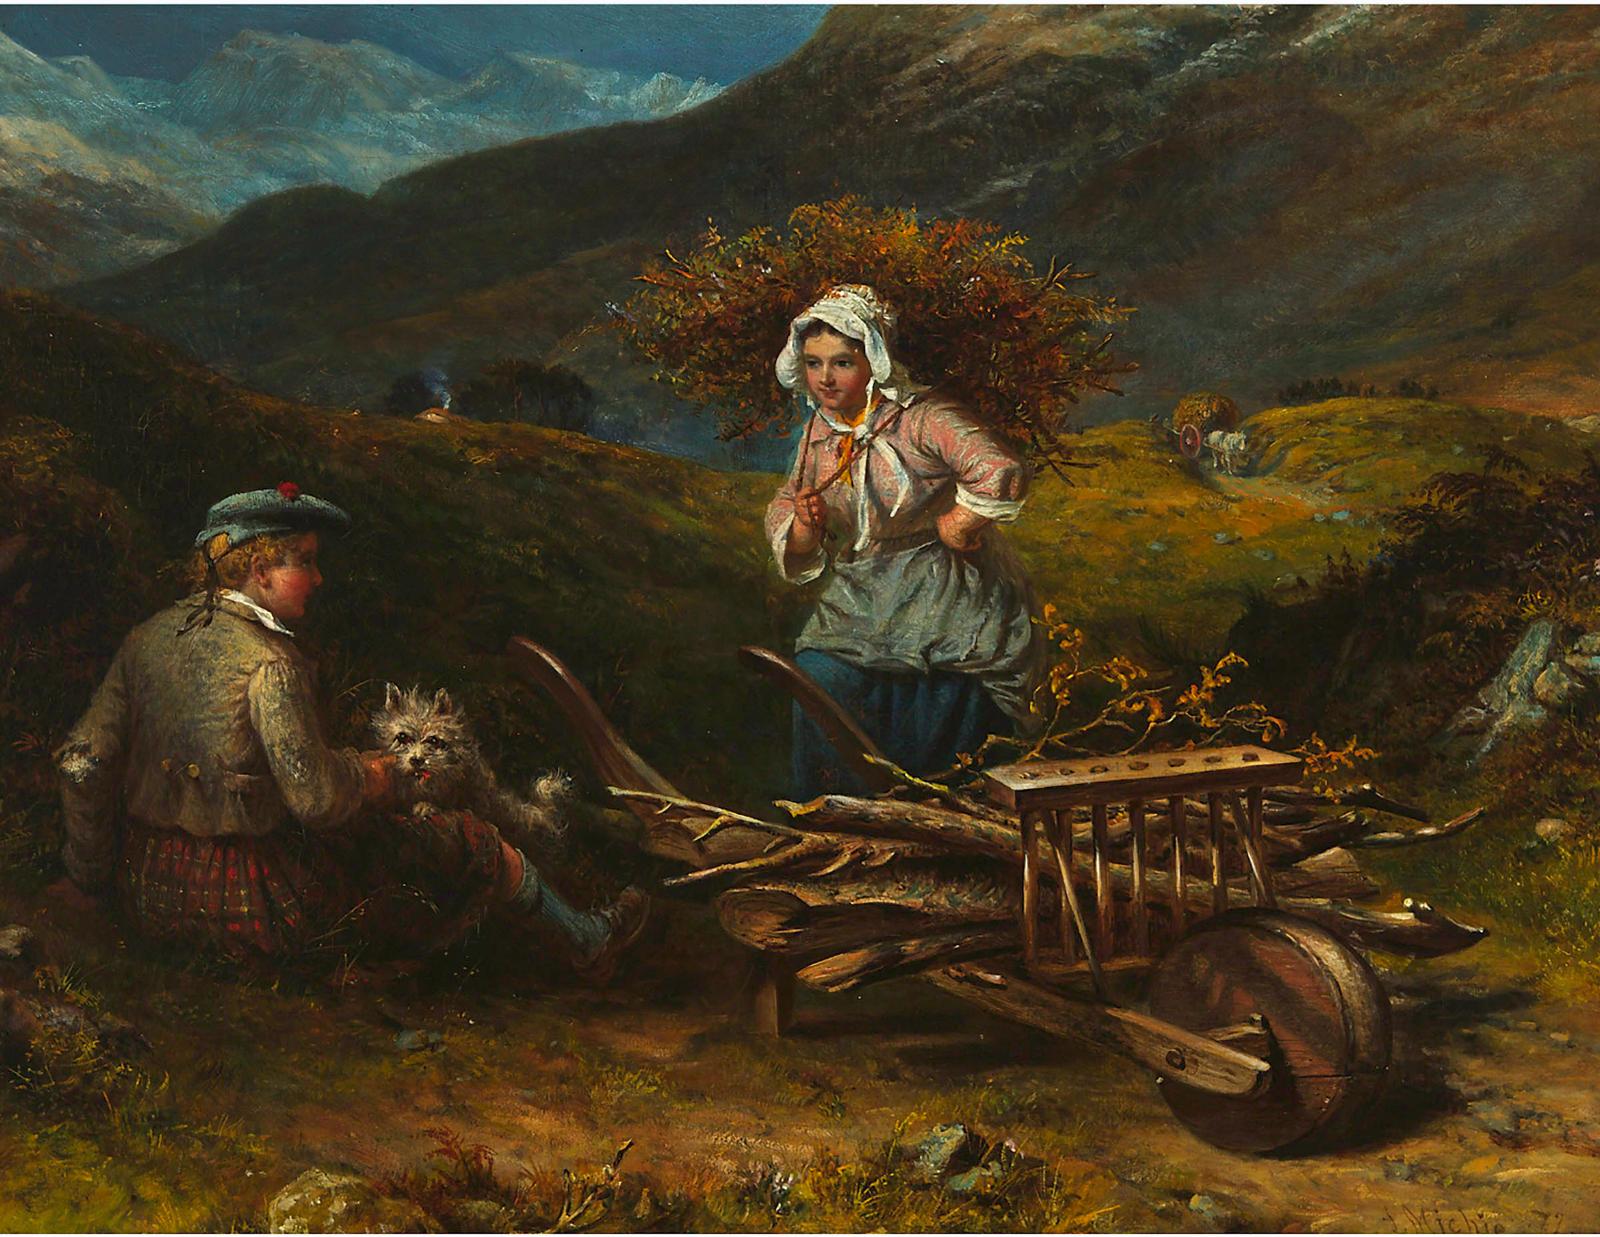 John Douglas Michie (1864-1892) - Young Wood Gatherers And Their West Highland Terrier In The Hills, 1872